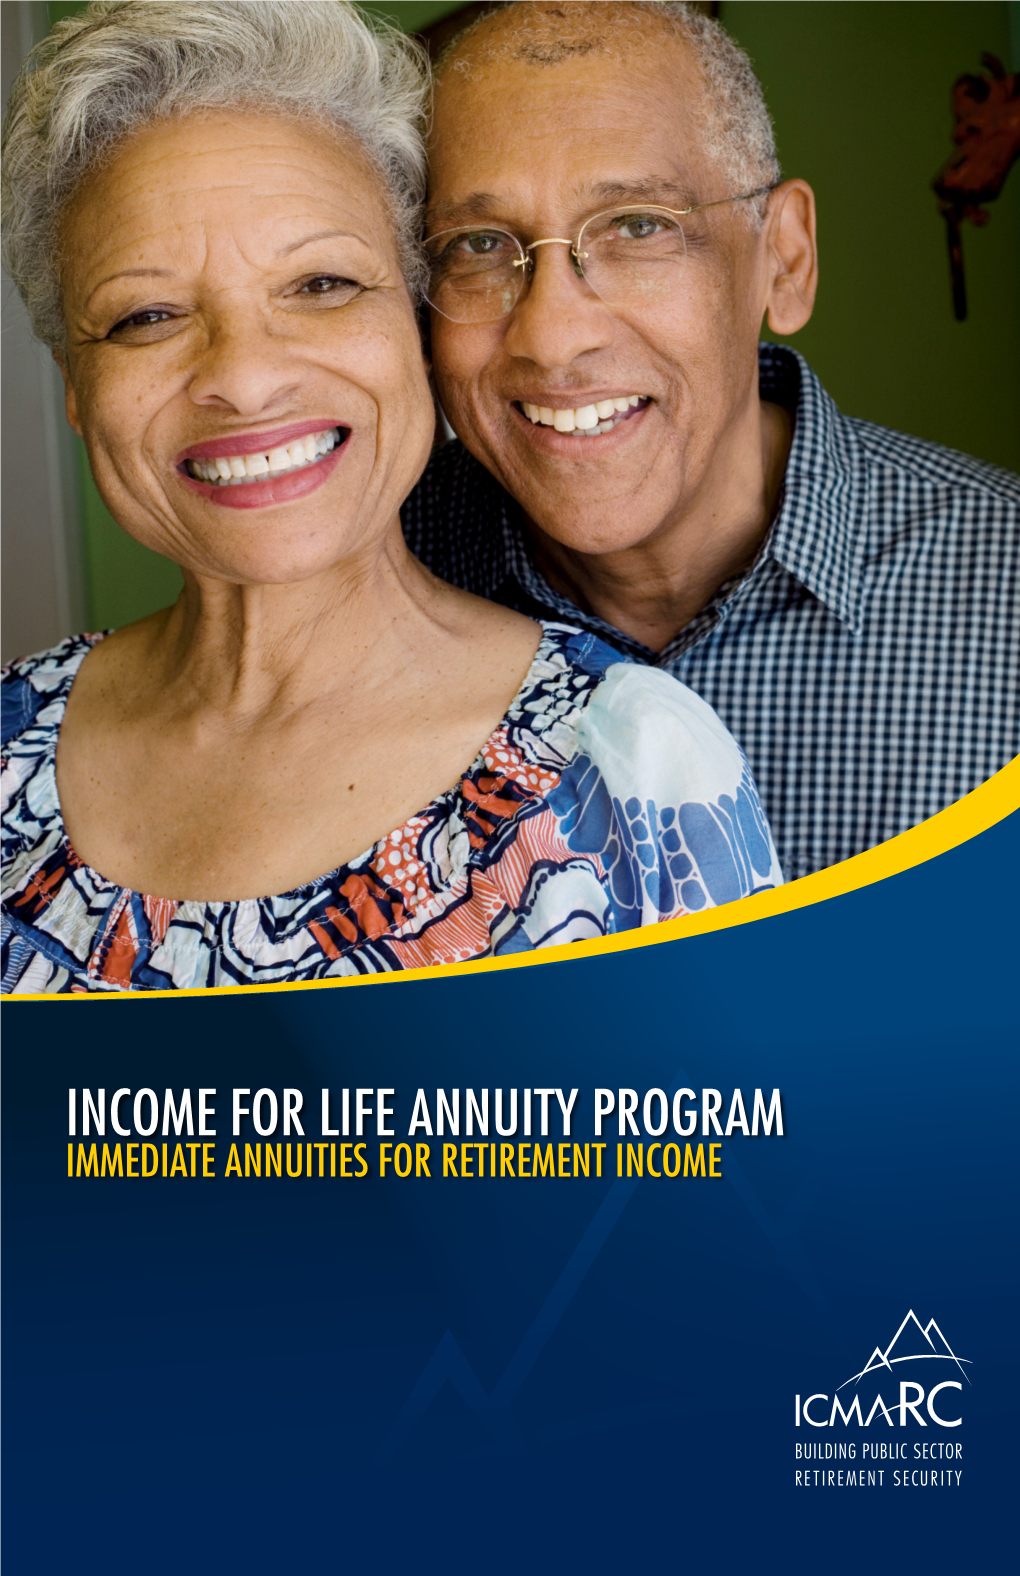 Missionsquare Retirement Income for Life Annuity Program